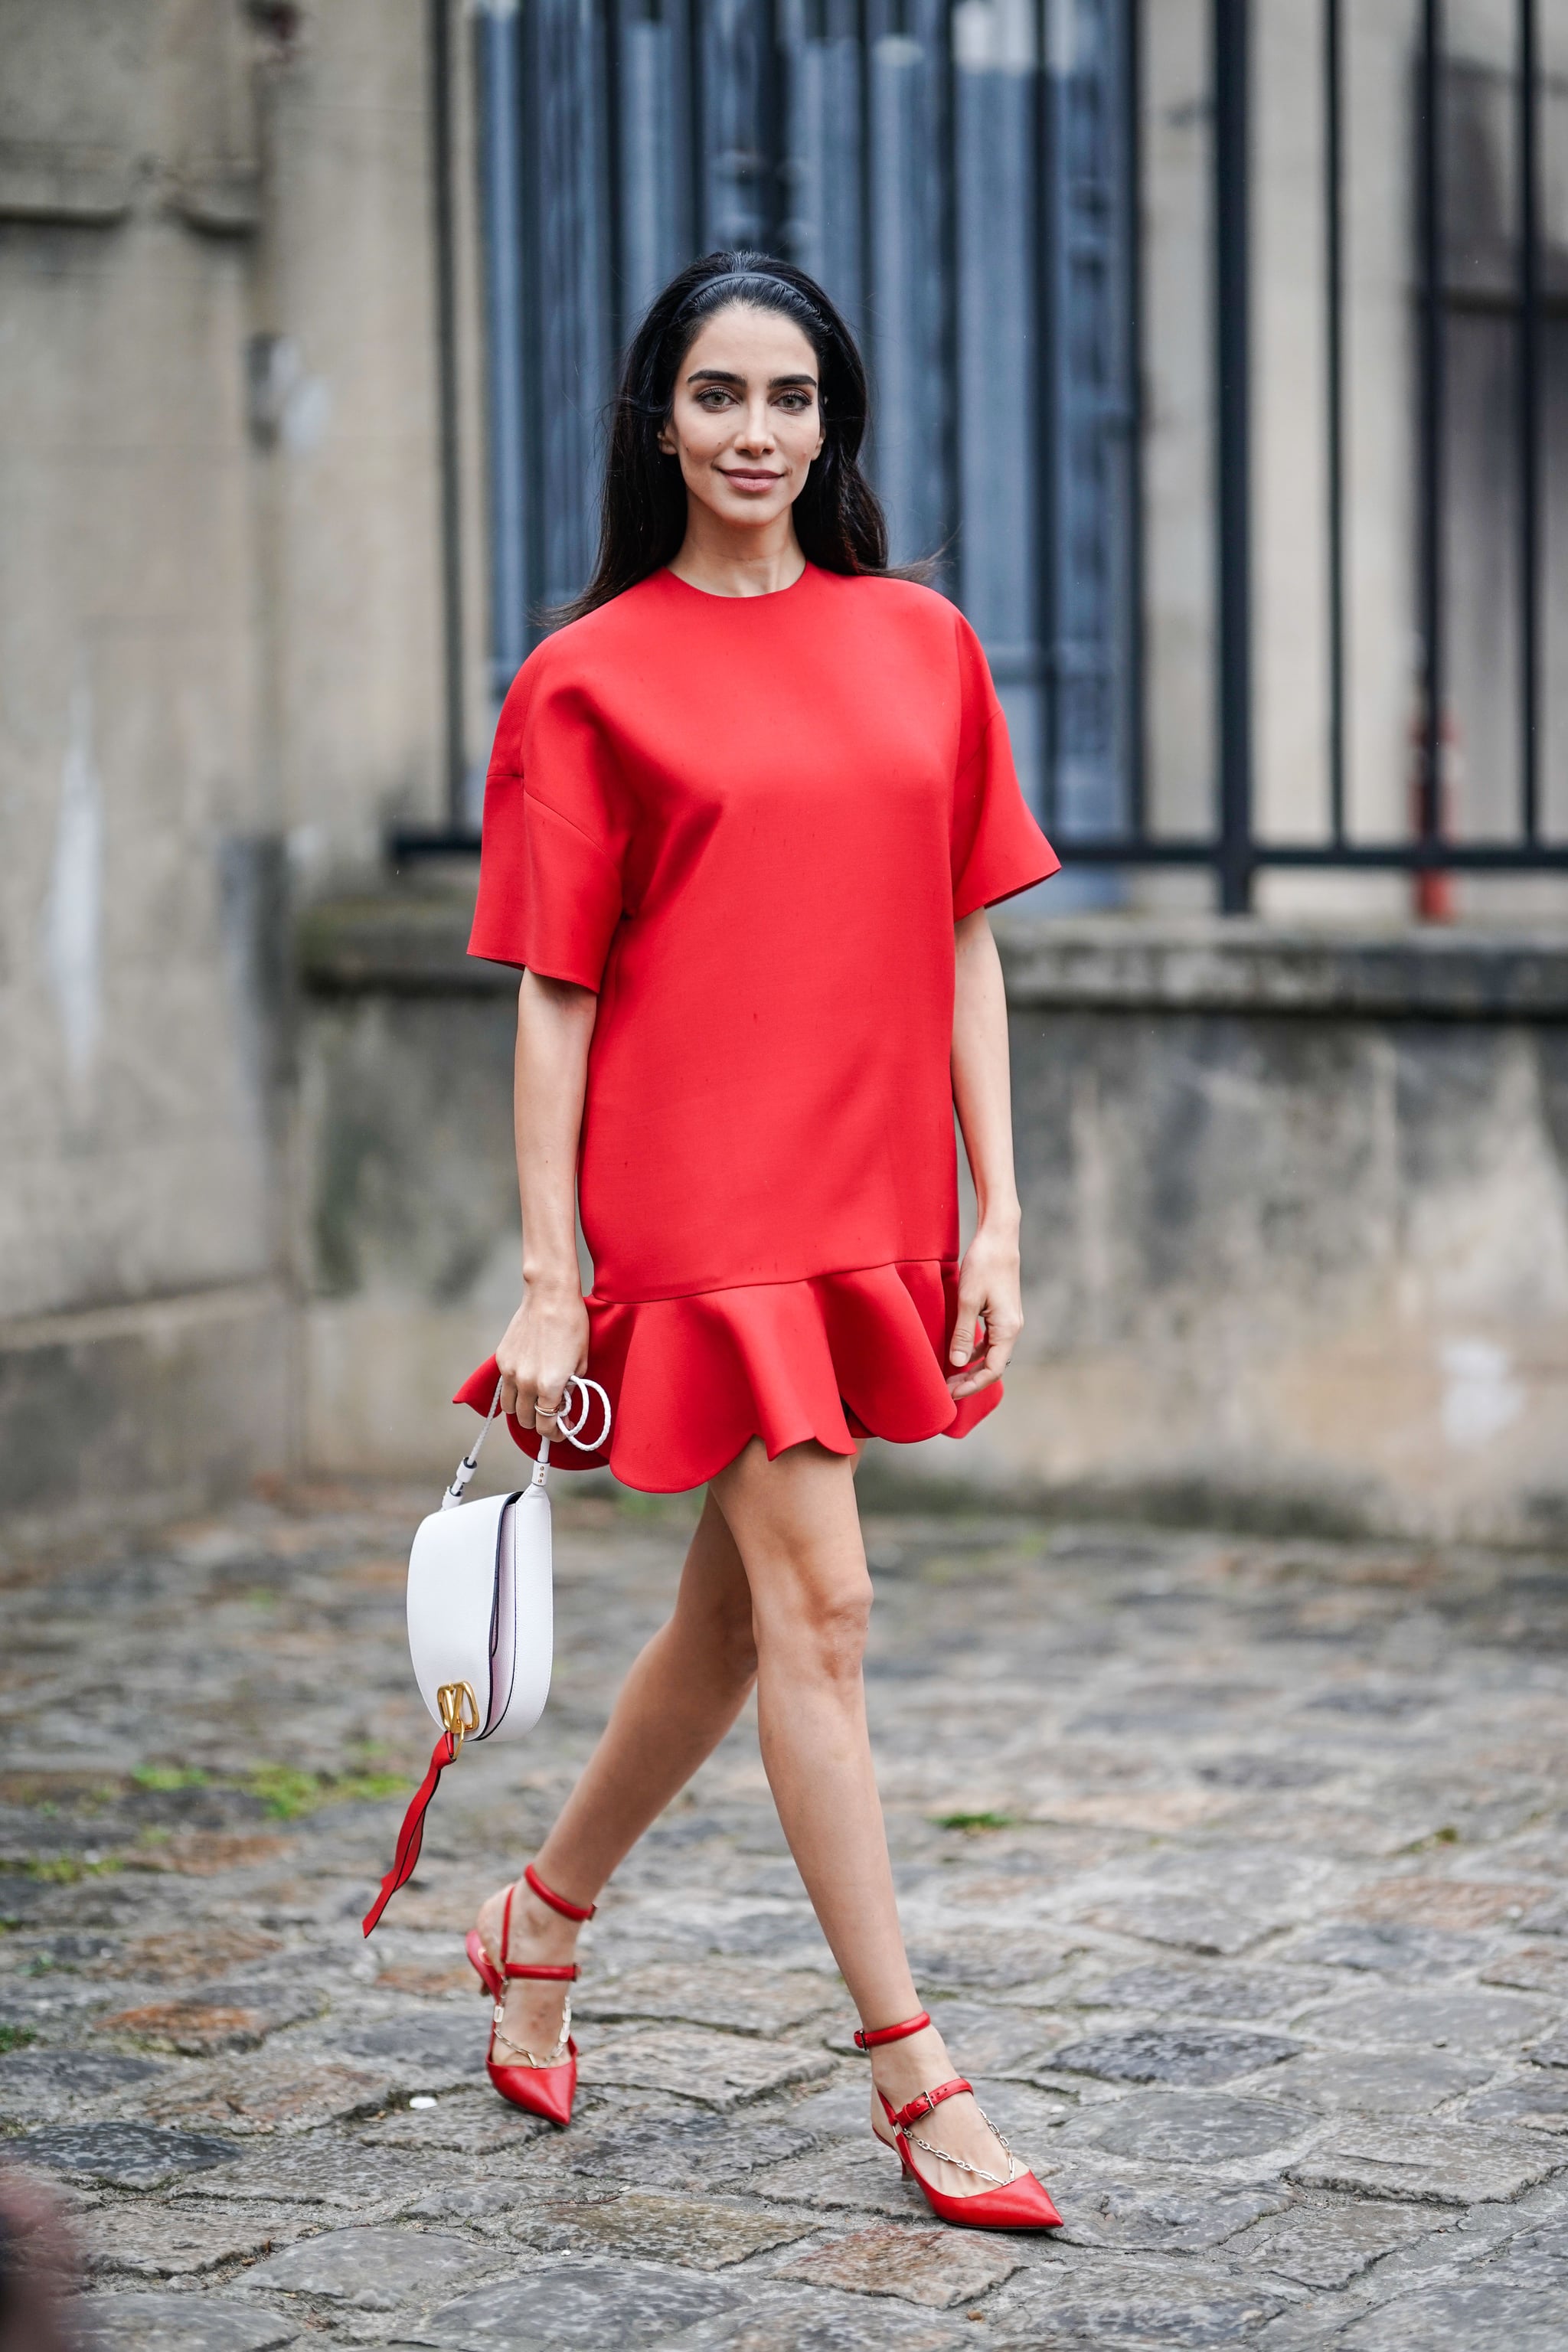 Add a Headband to Your Favorite Red Dress | 27 Breezy Work Outfits That'll  Inspire You All Summer Long | POPSUGAR Fashion Photo 16